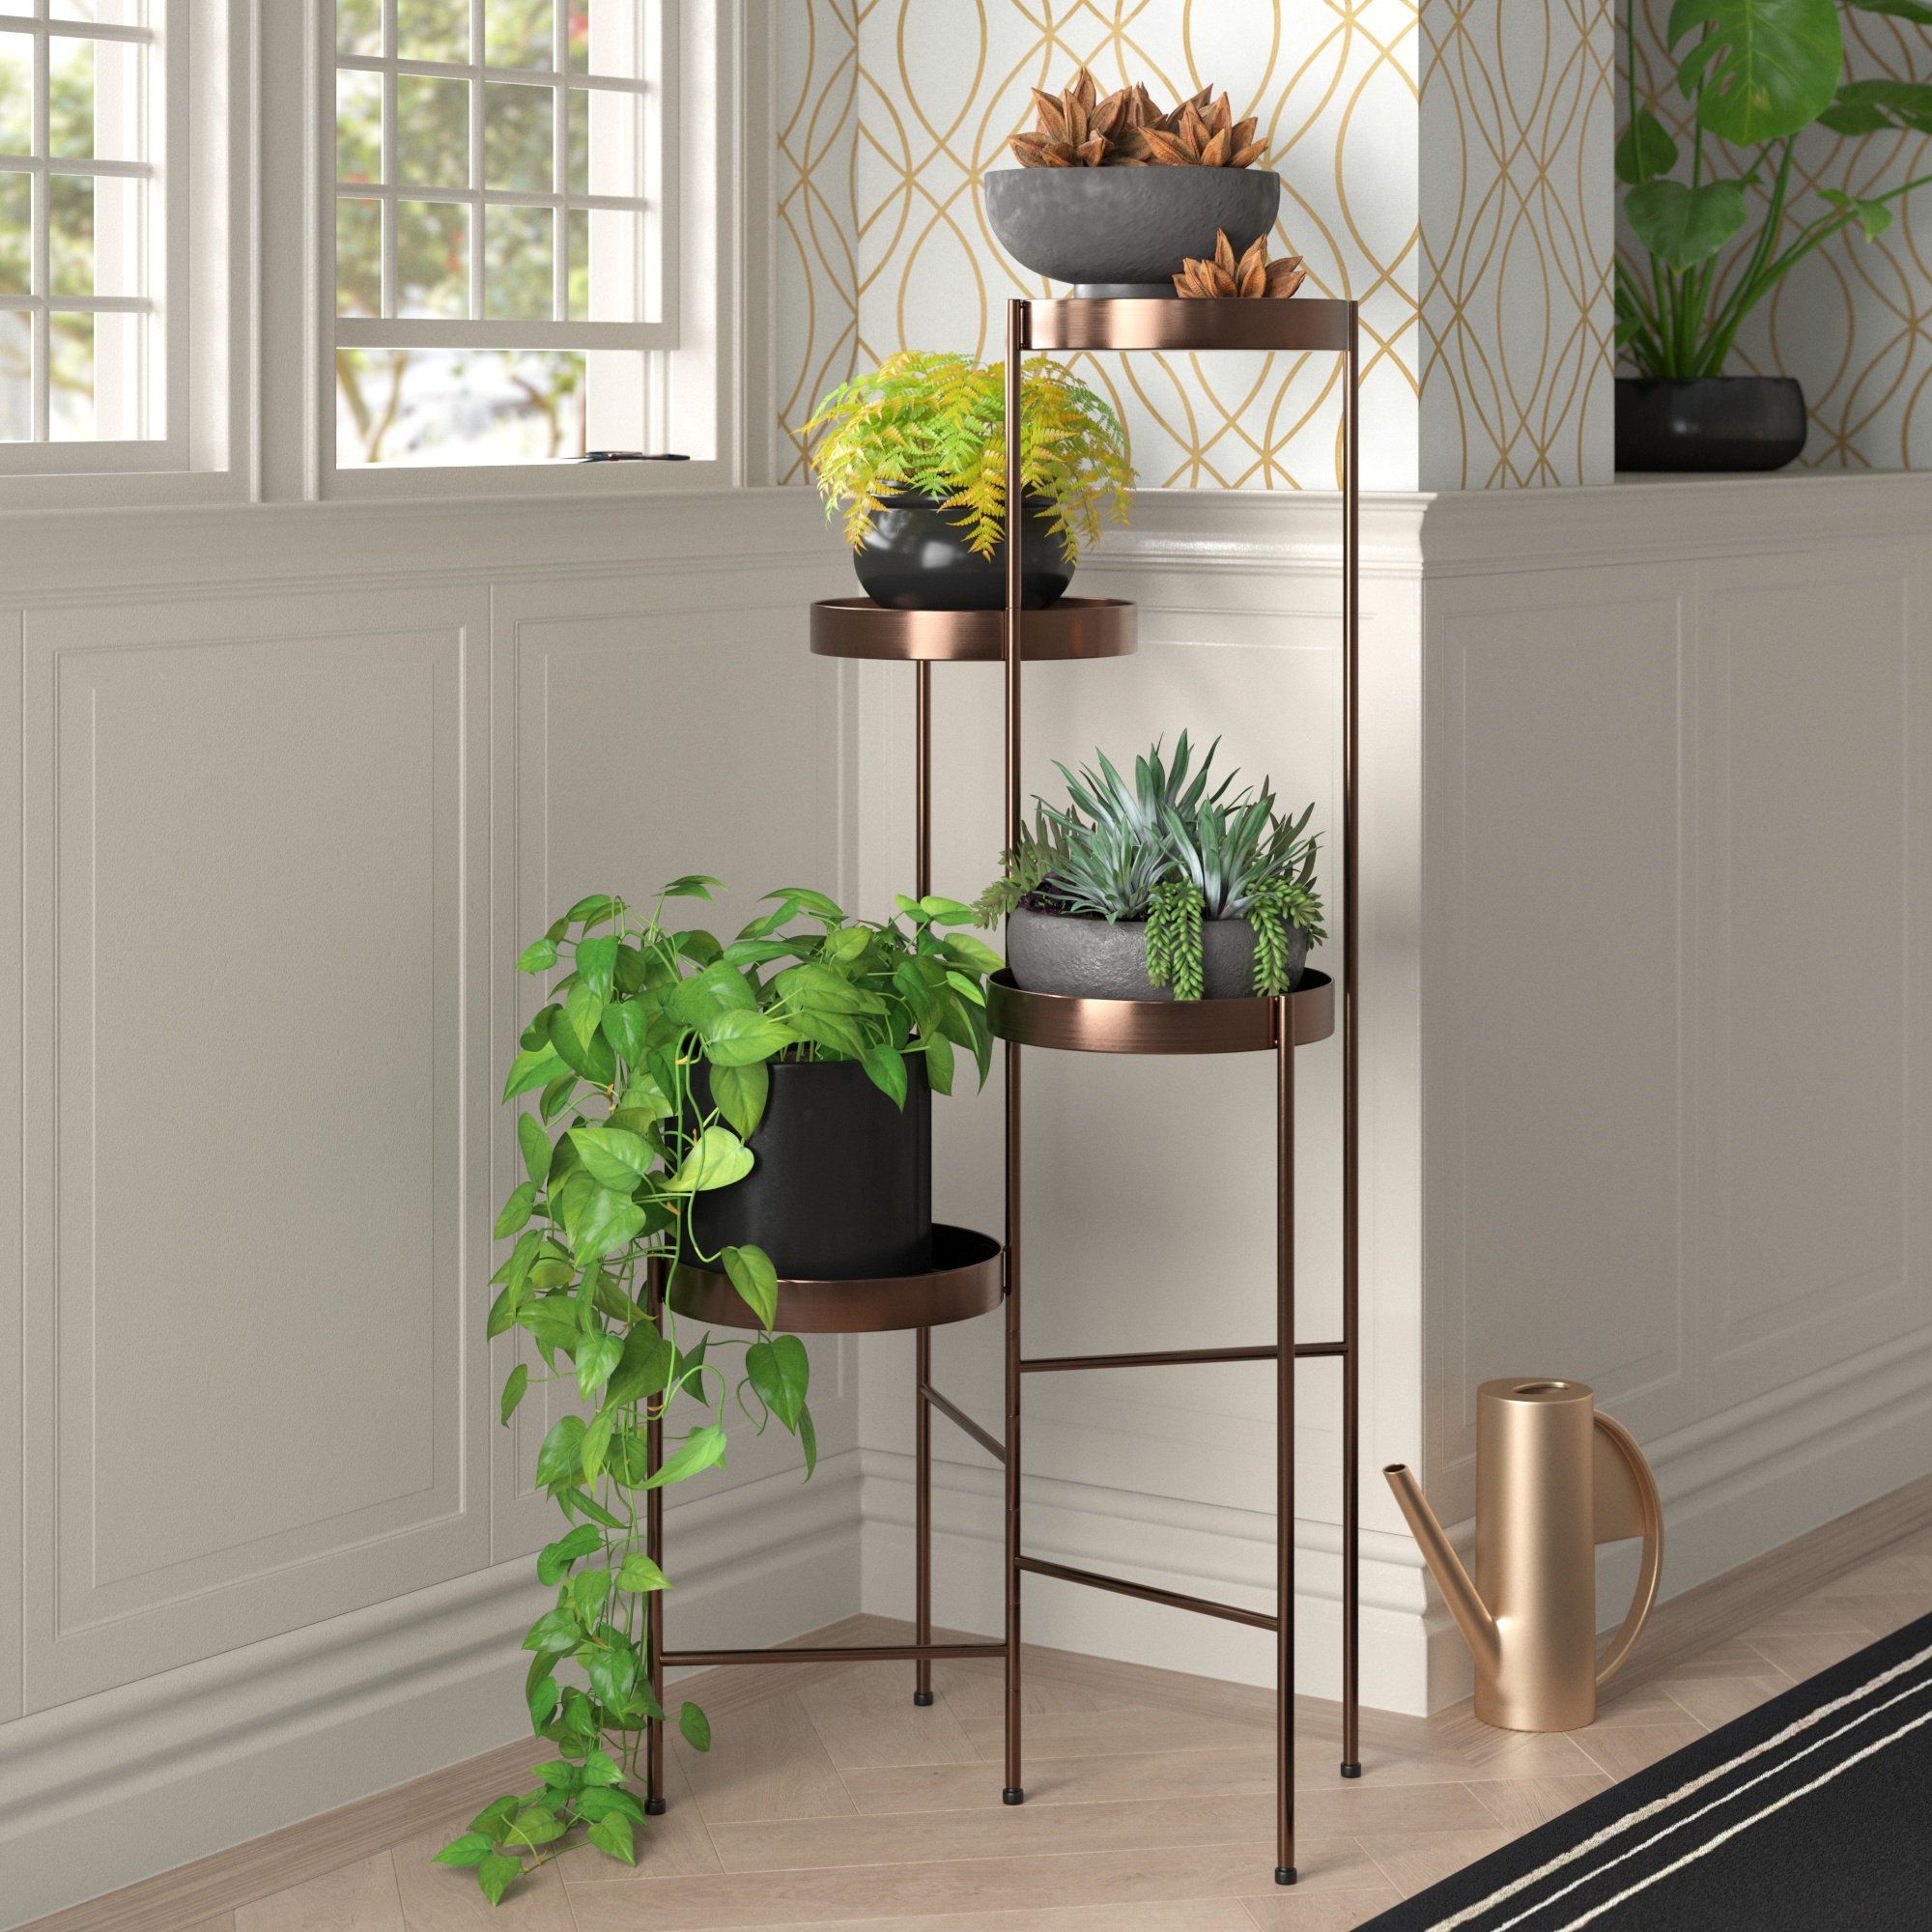 Most Recent Willa Arlo Interiors Malachy Round Multi Tiered Plant Stand & Reviews (View 15 of 15)